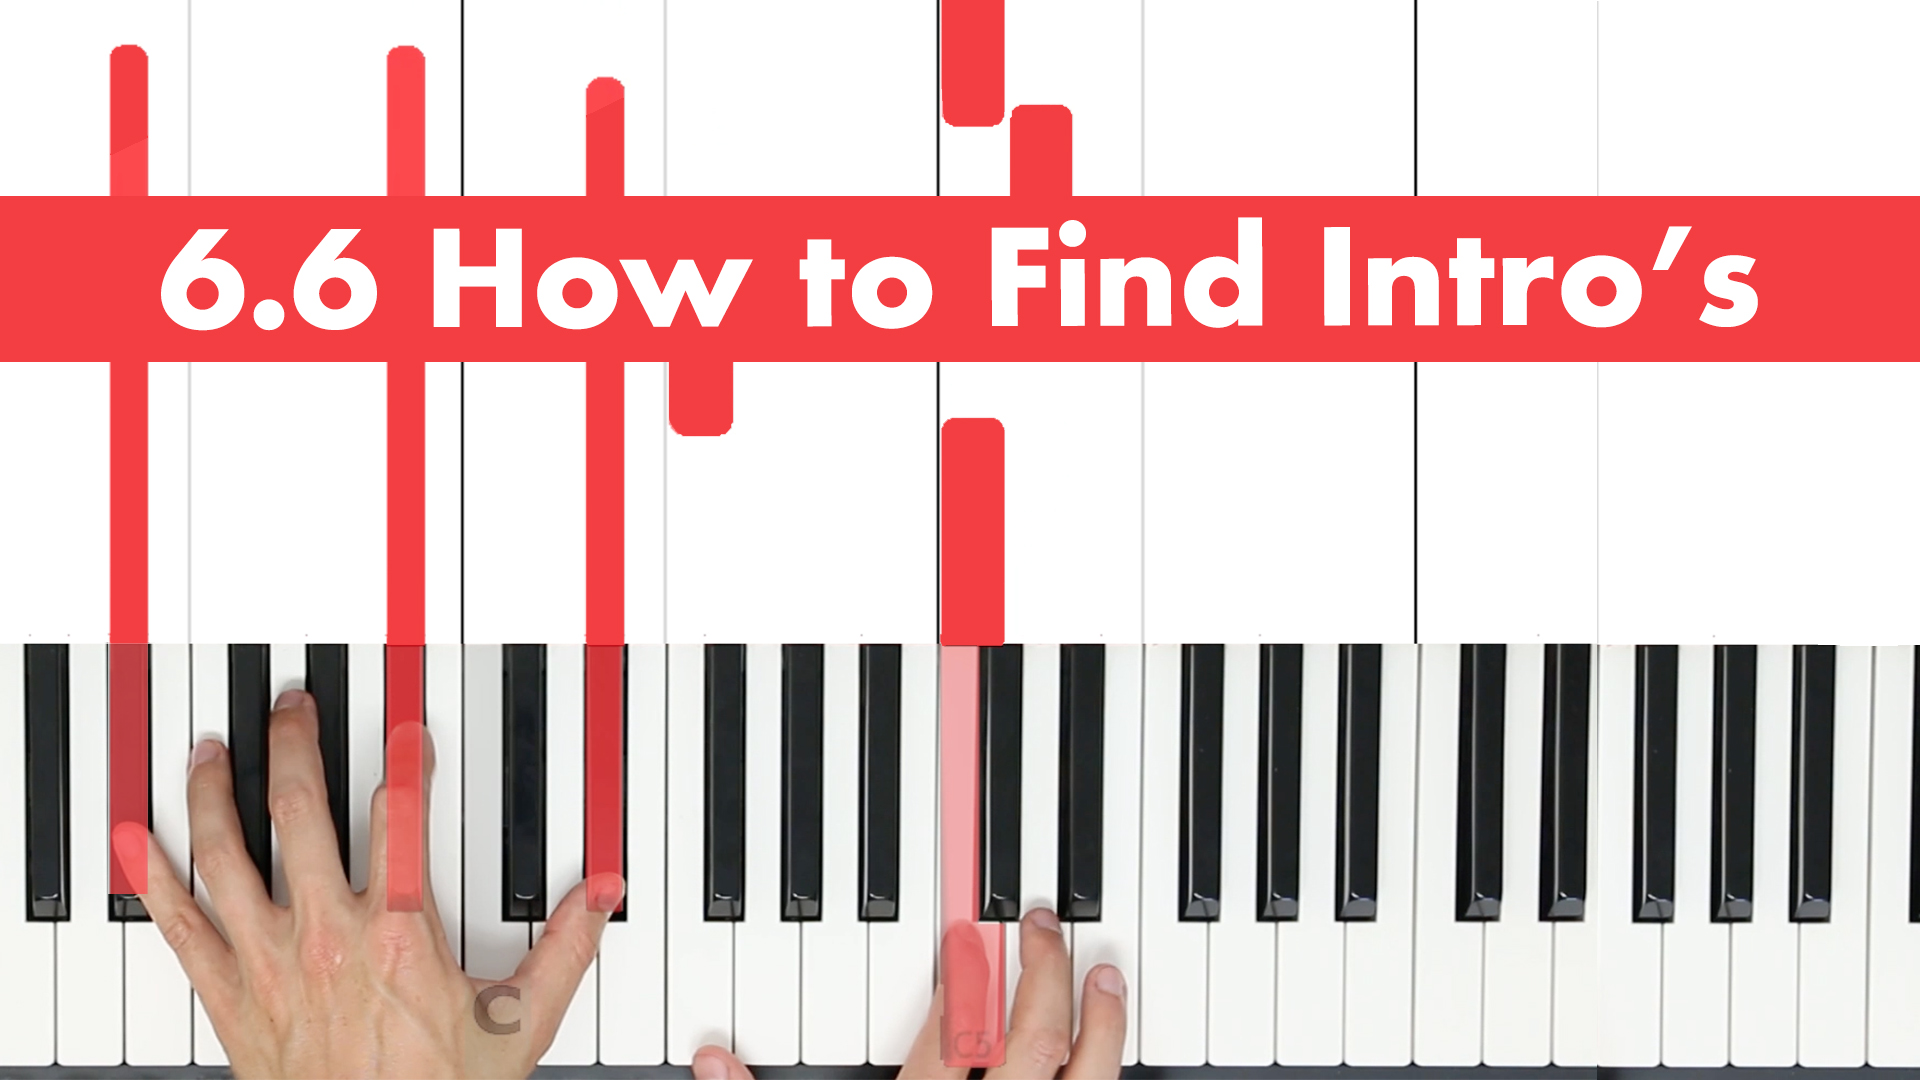 6.6 How To Find Intro’s